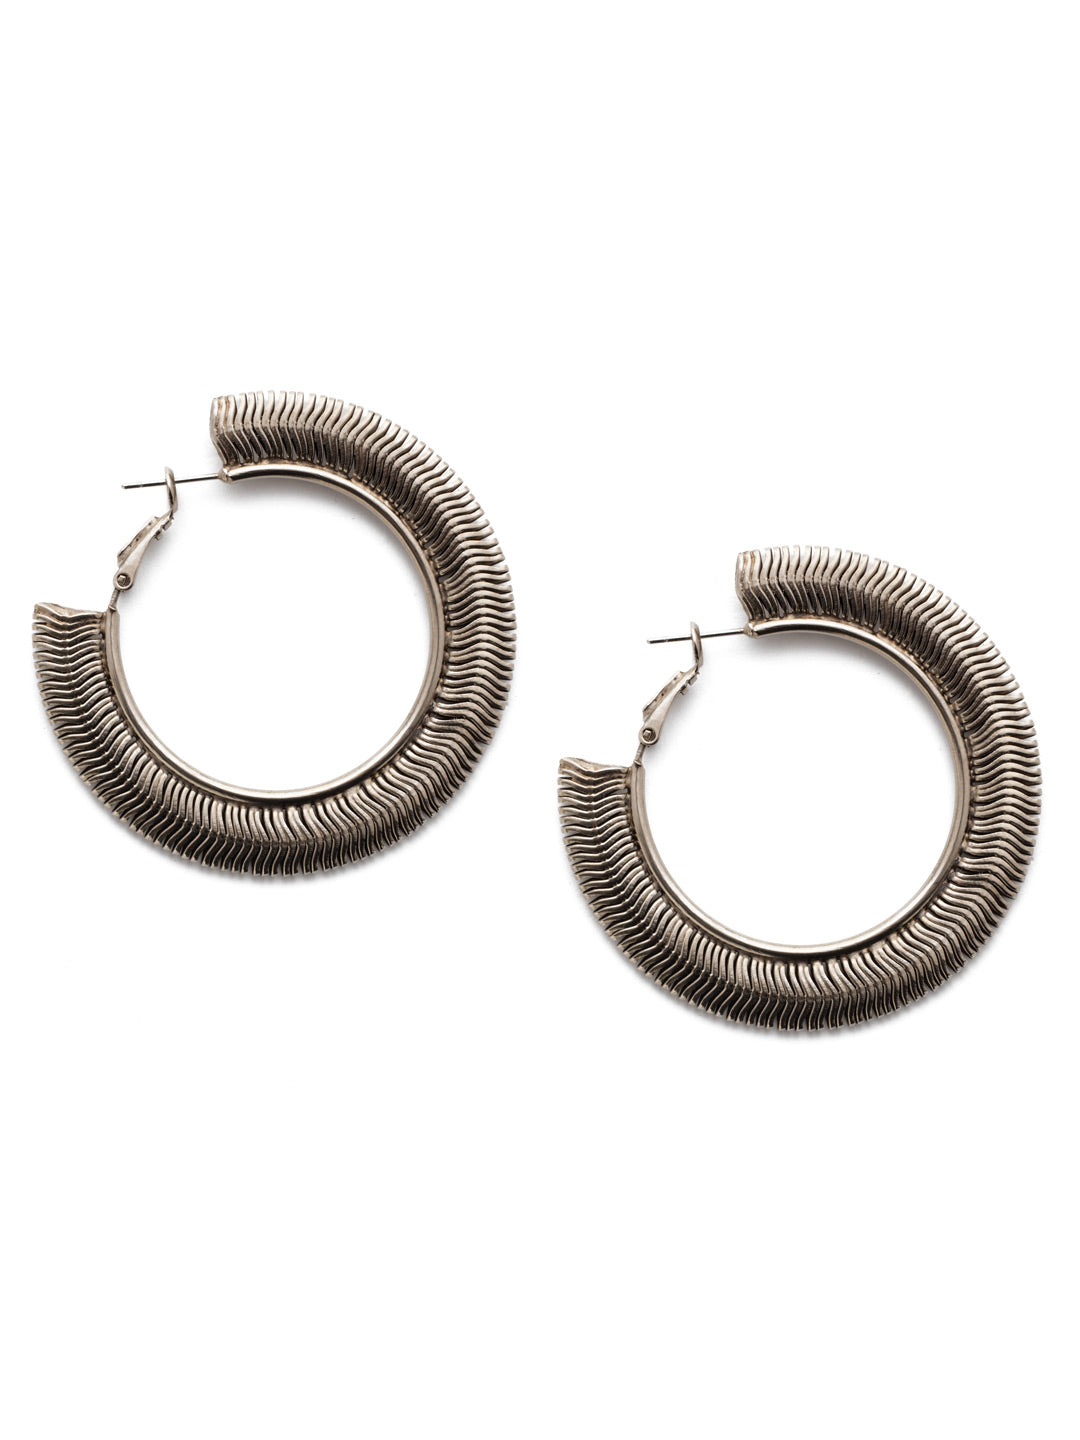 Isadora Hoop Earrings - 4EEP2ASCRY - <p>Show off your edgy side in the Isadora Statement Hoop Earring. Made entirely from snake chain metal, this pair is fun and fiesty. From Sorrelli's Crystal collection in our Antique Silver-tone finish.</p>